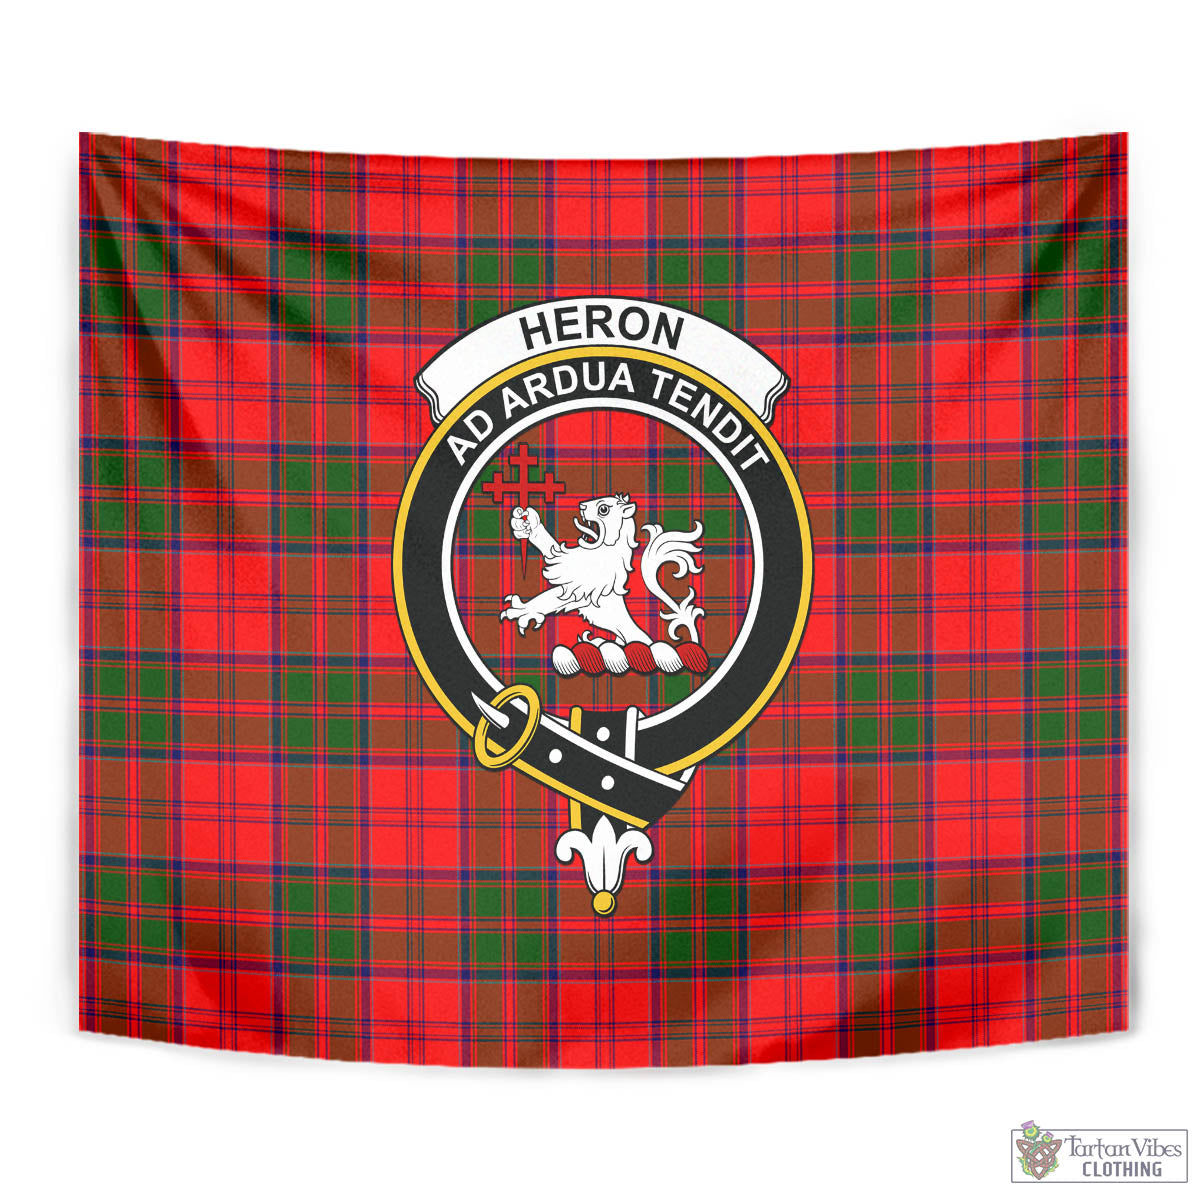 Tartan Vibes Clothing Heron Tartan Tapestry Wall Hanging and Home Decor for Room with Family Crest